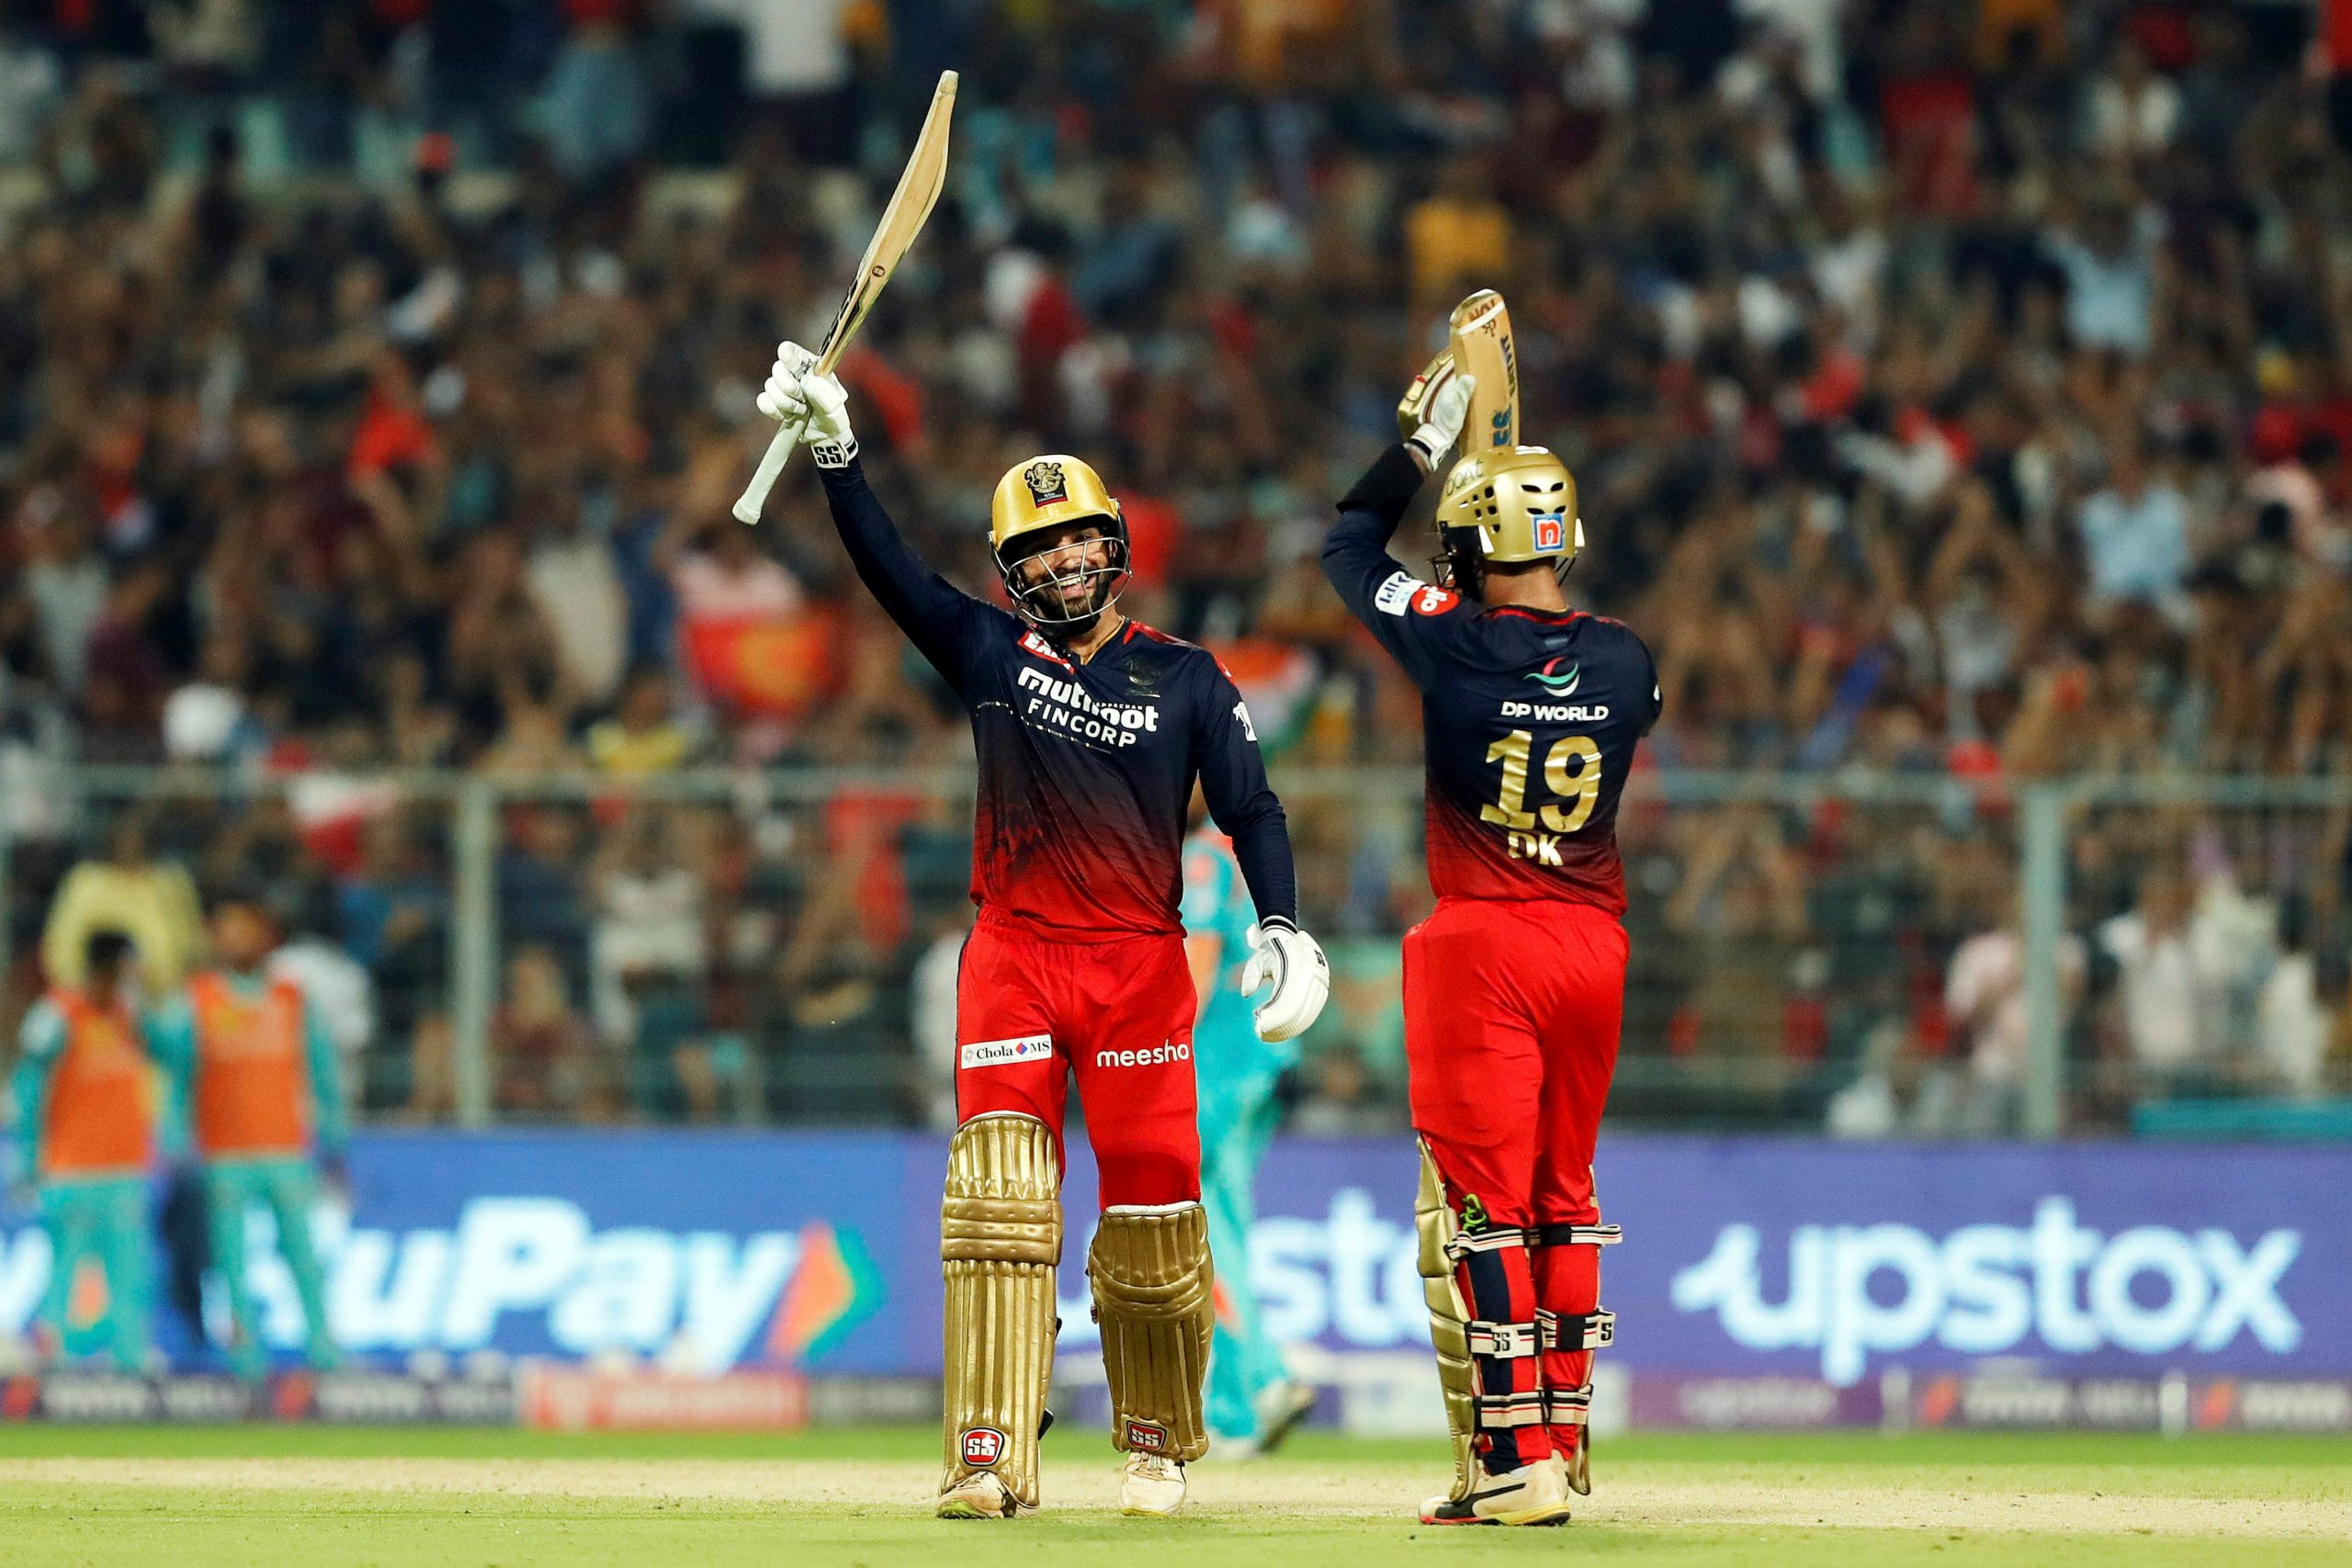 And the dream continues: Rajat Patidar fires RCB past helpless Lucknow